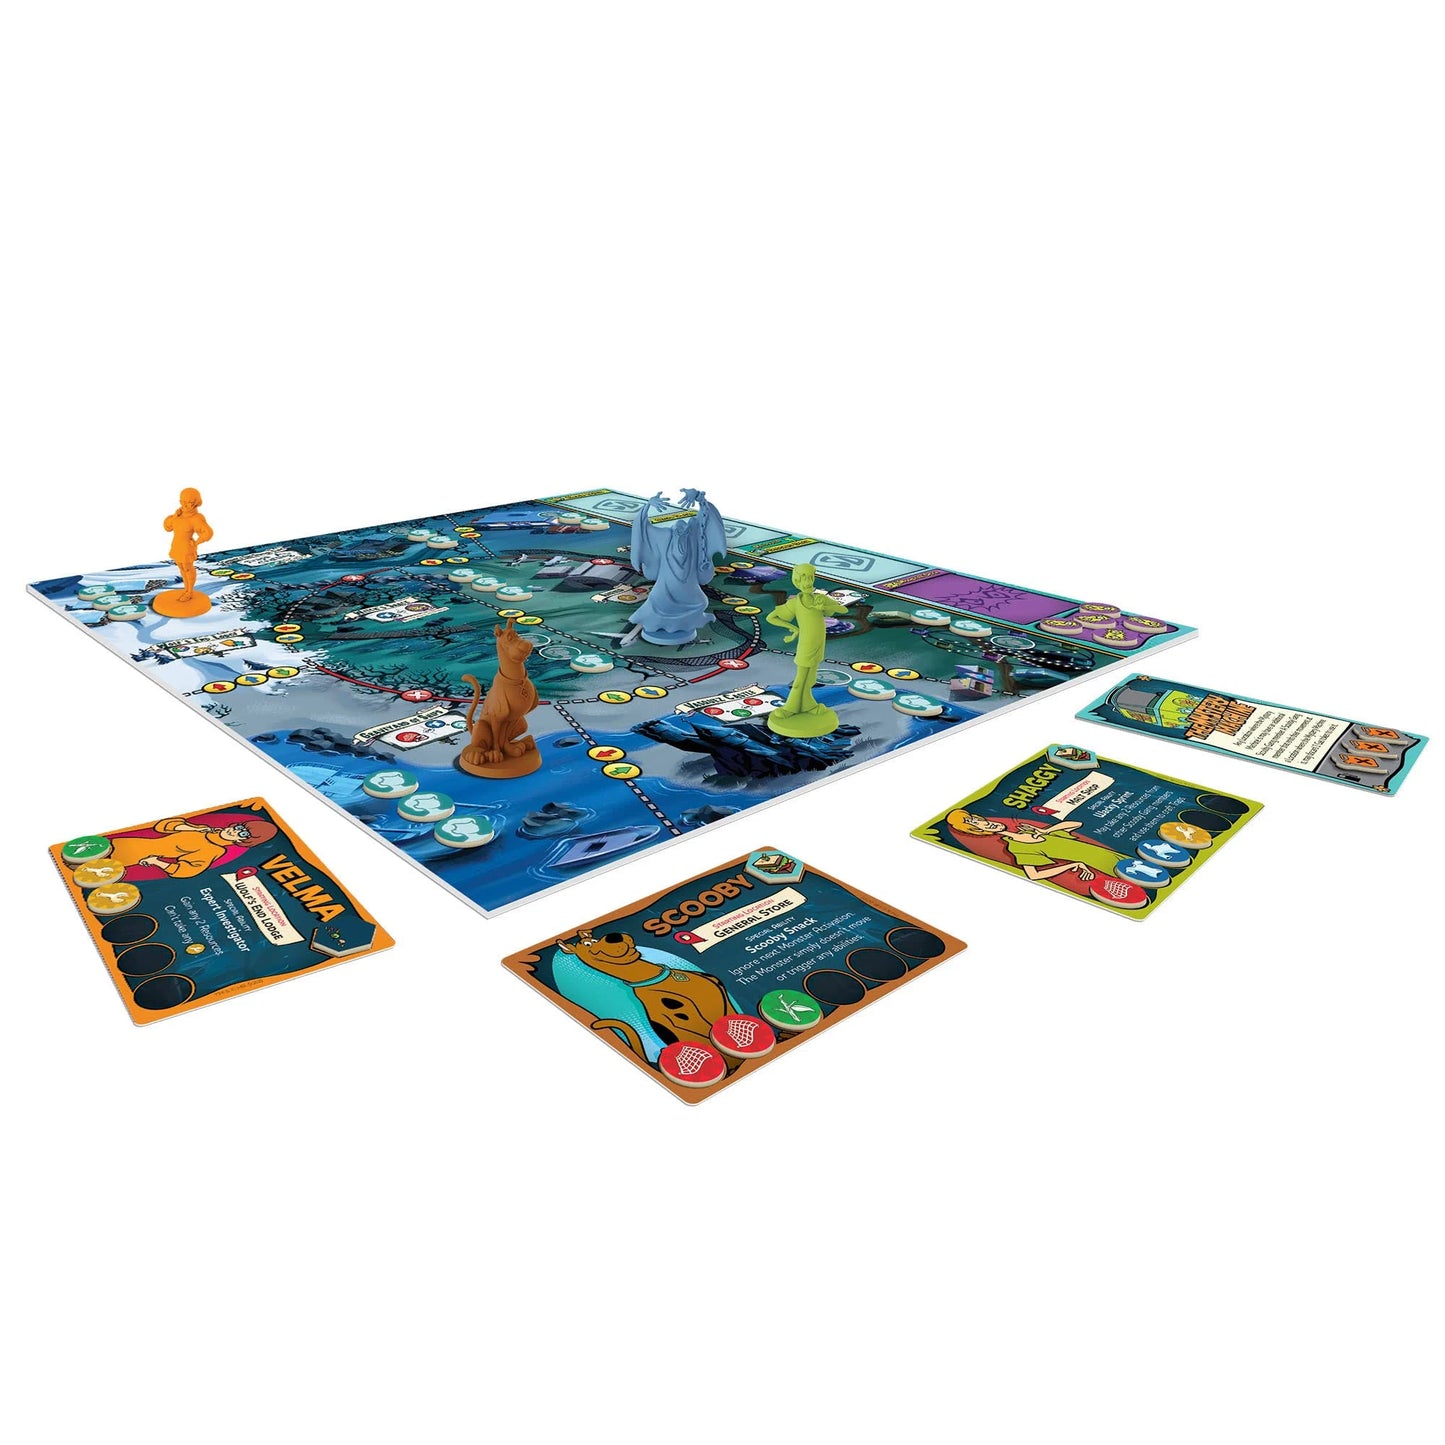 Board Game: Scooby Doo The Board Game